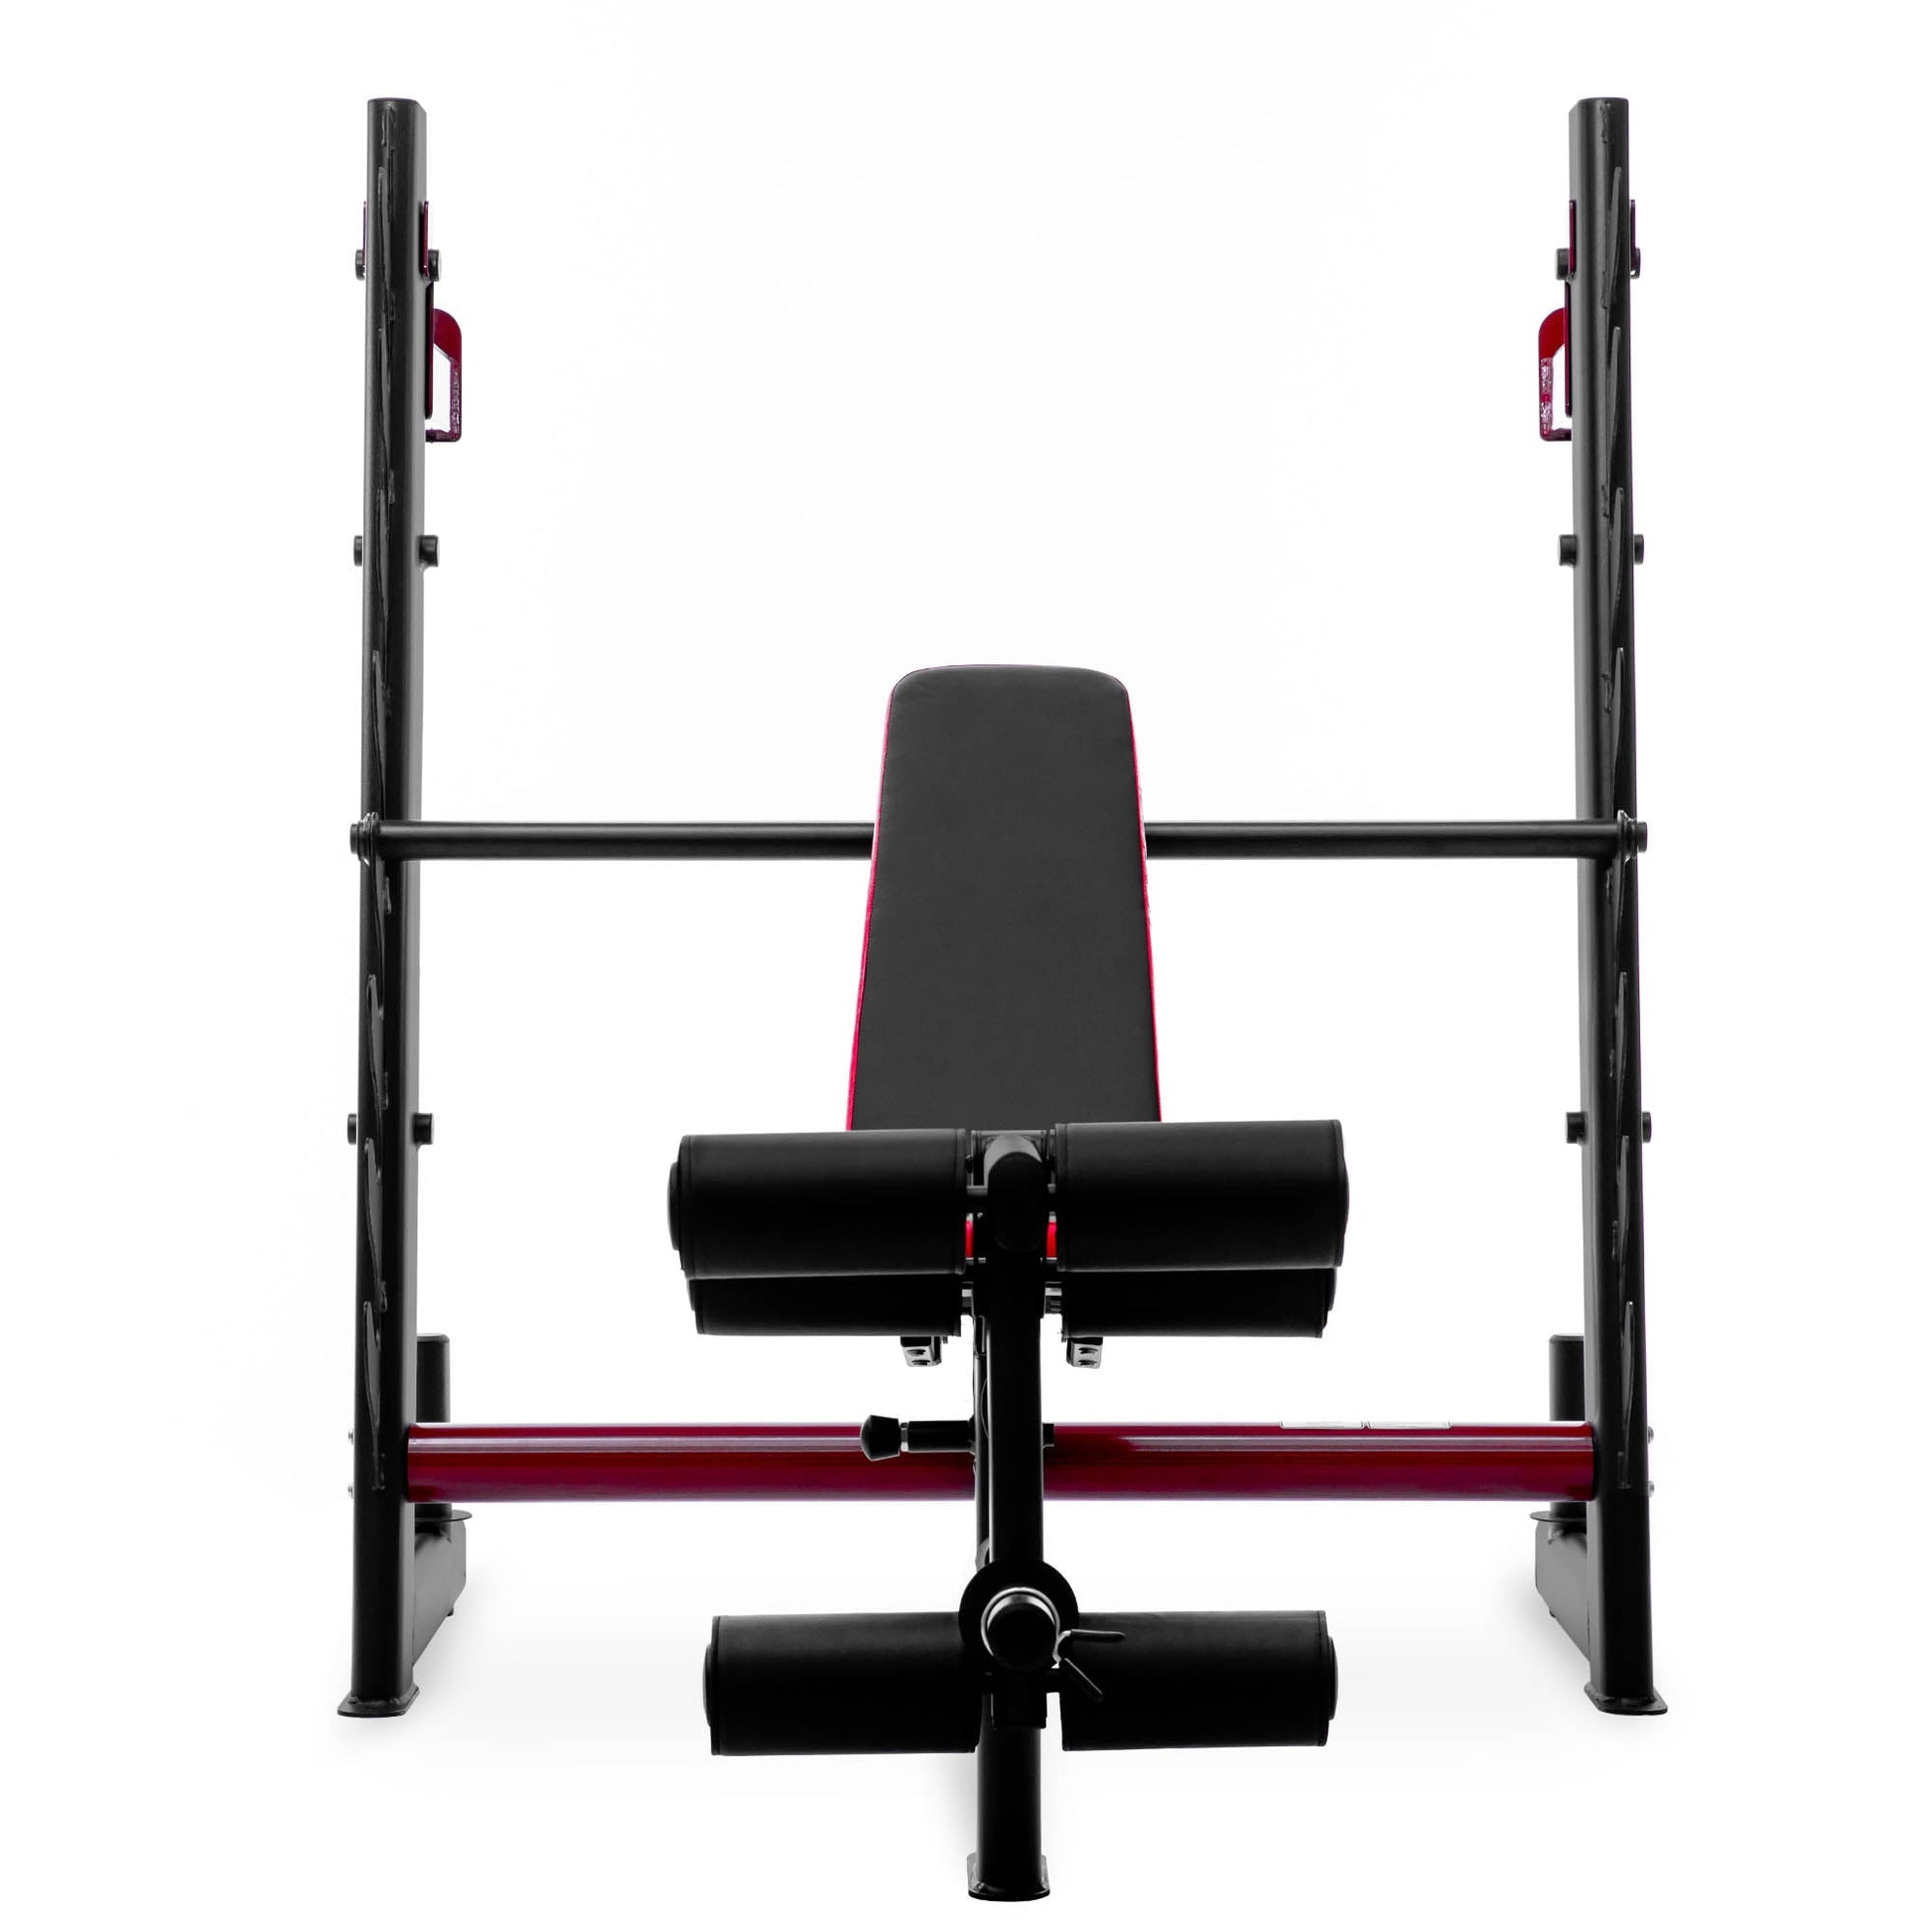 |Viavito Studio Pro 2000 Olympic Barbell Weight Bench - Front|